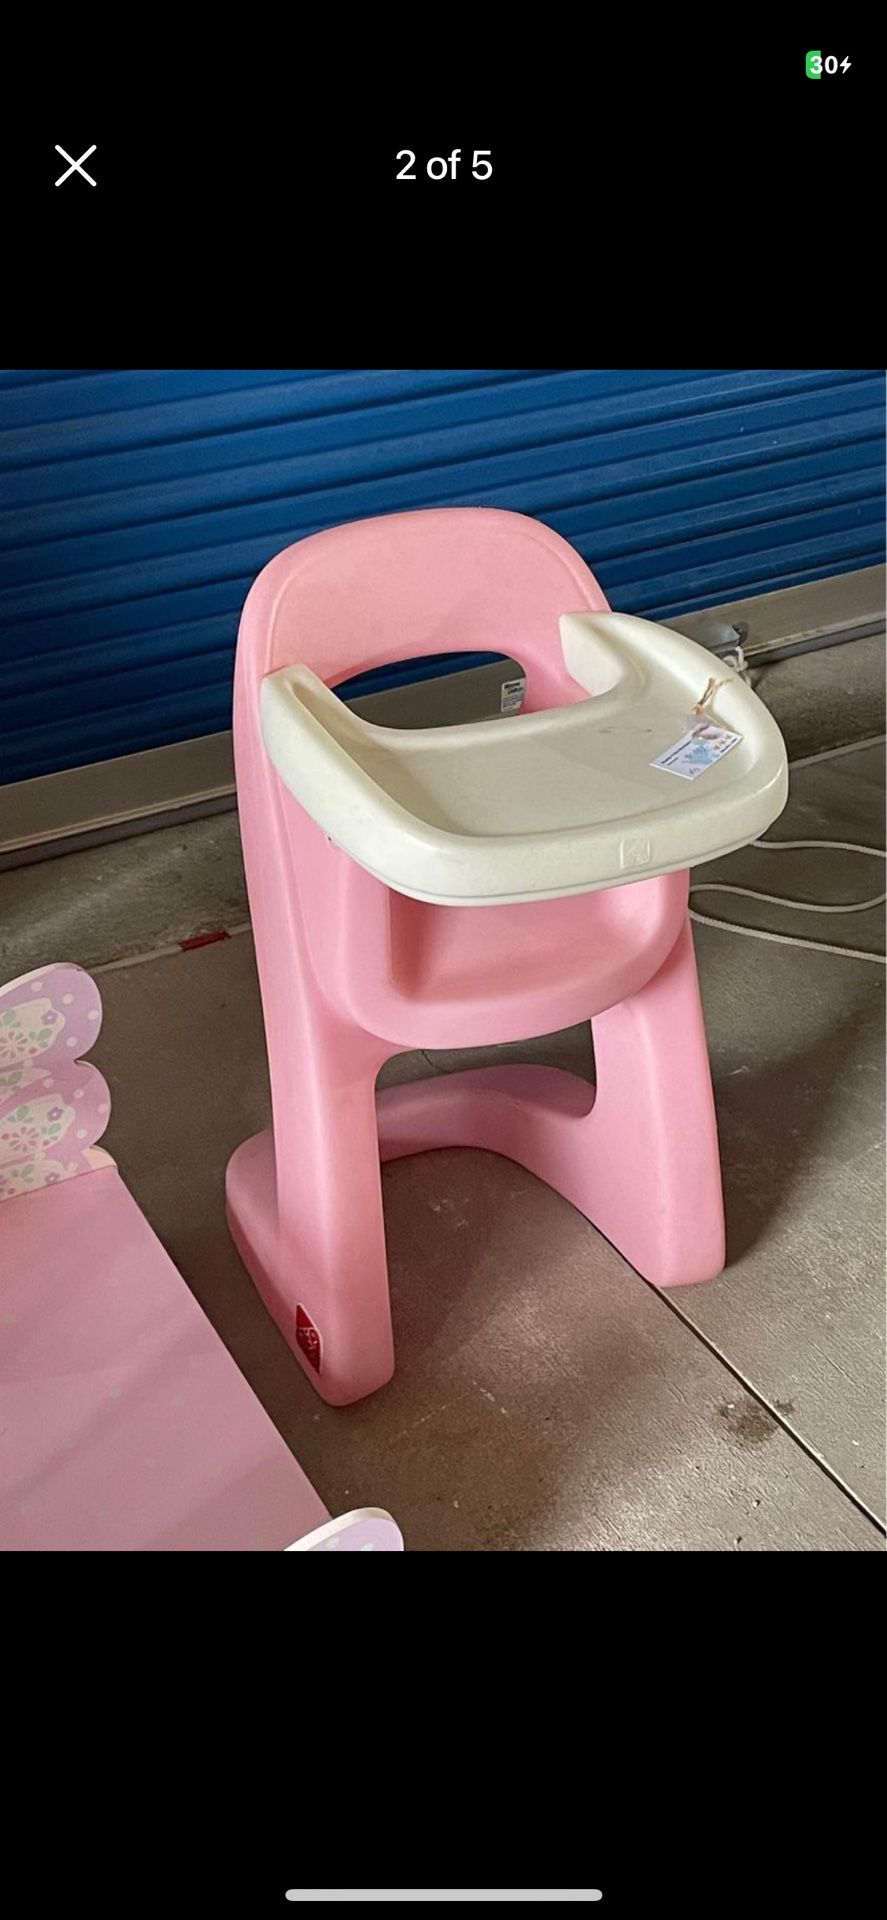 Rare Vintage Little Tikes Plastic Pink Highchair Fits American Girl Dolls 18 Inch Or Bigger